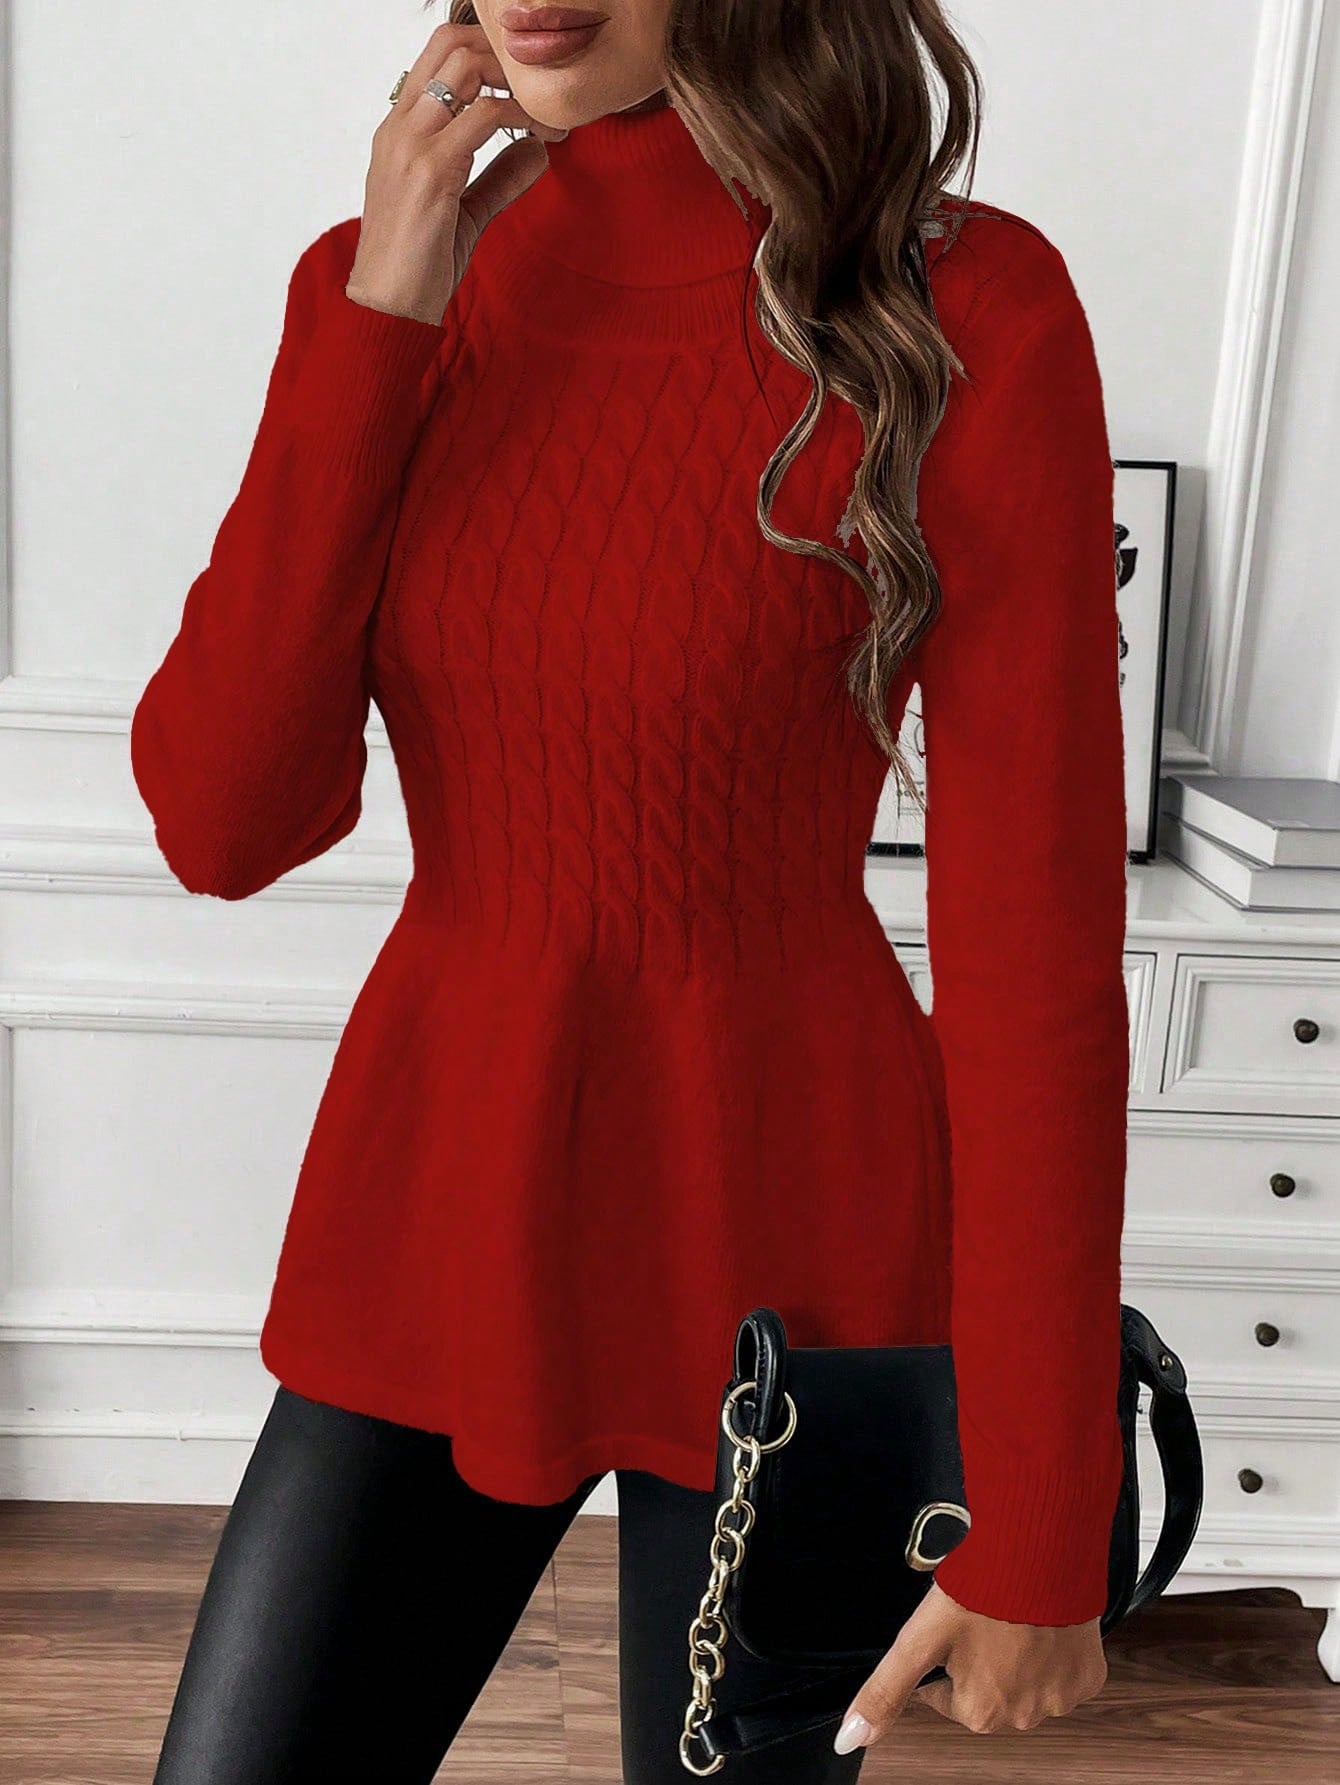 Essnce Women's Simple Solid Colored High Neck Sweater